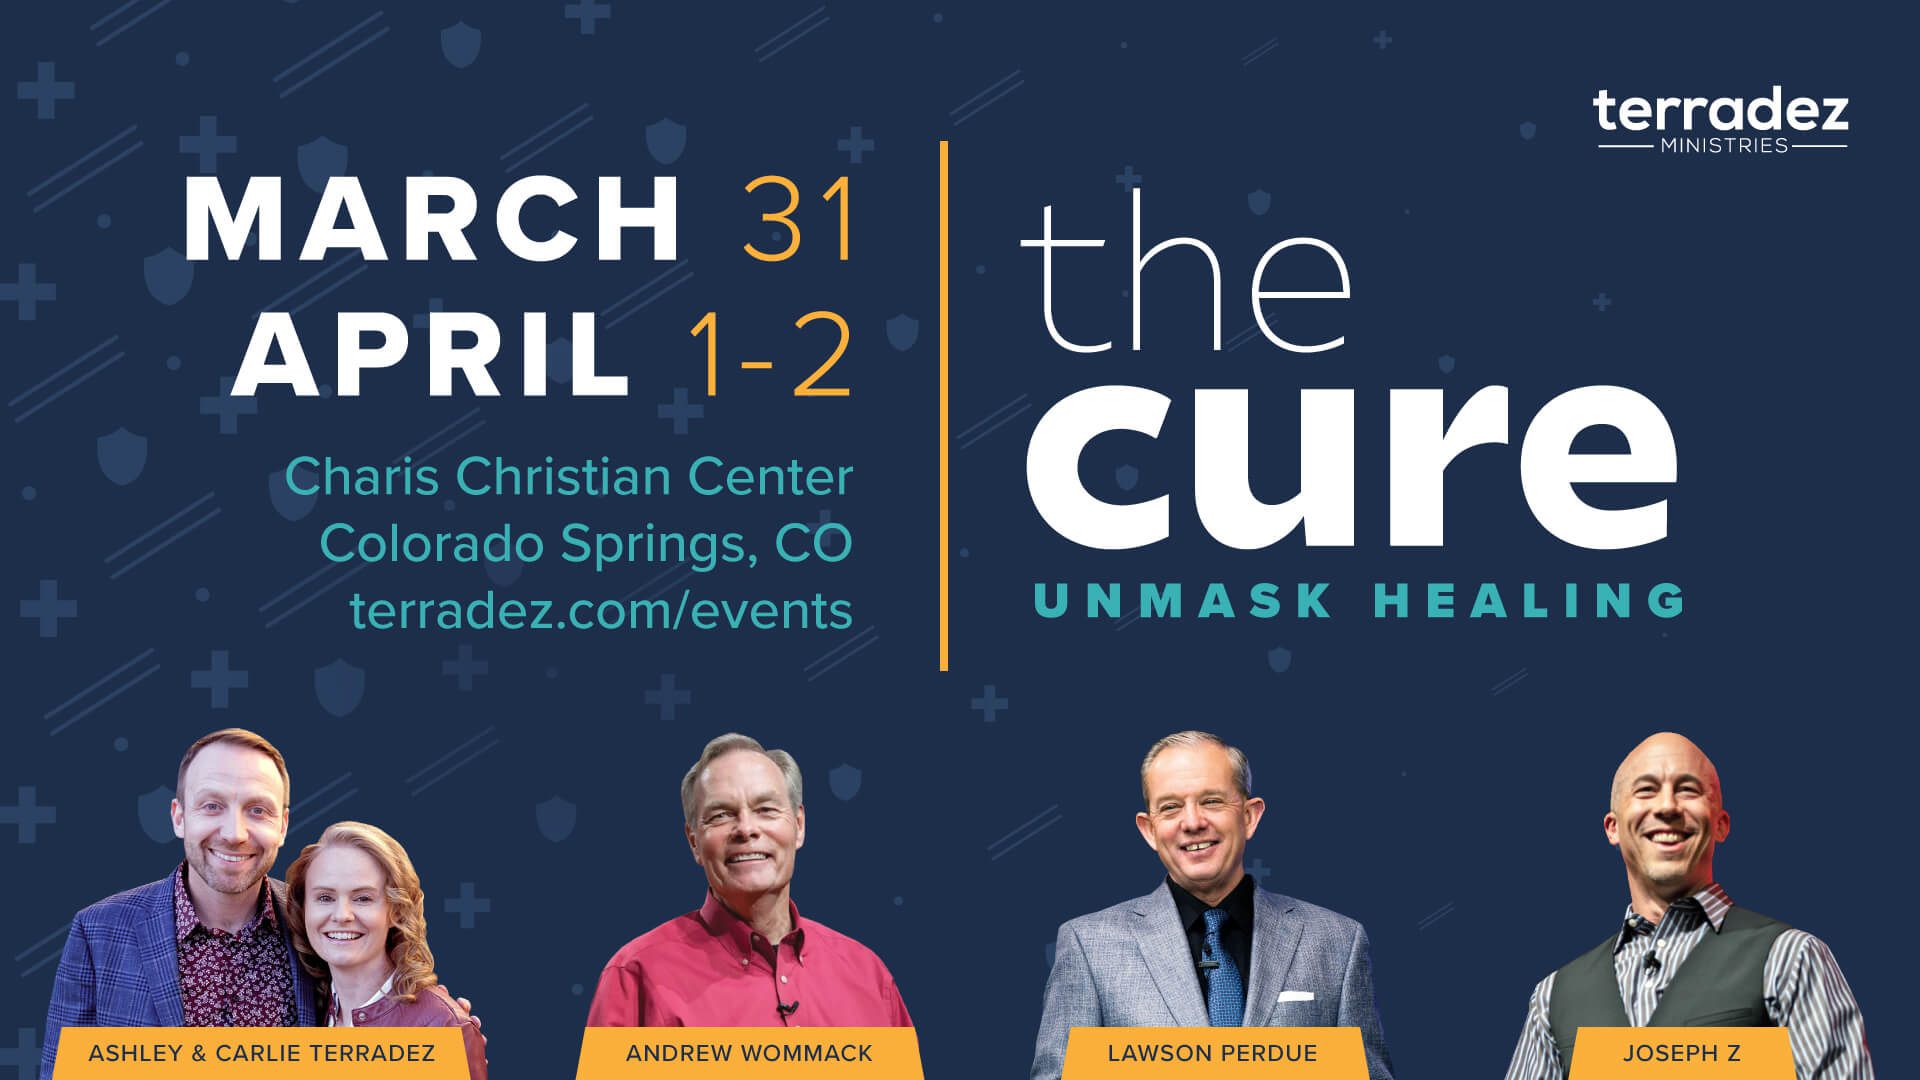 The Cure event at Charis Christian Center in Colorado Springs